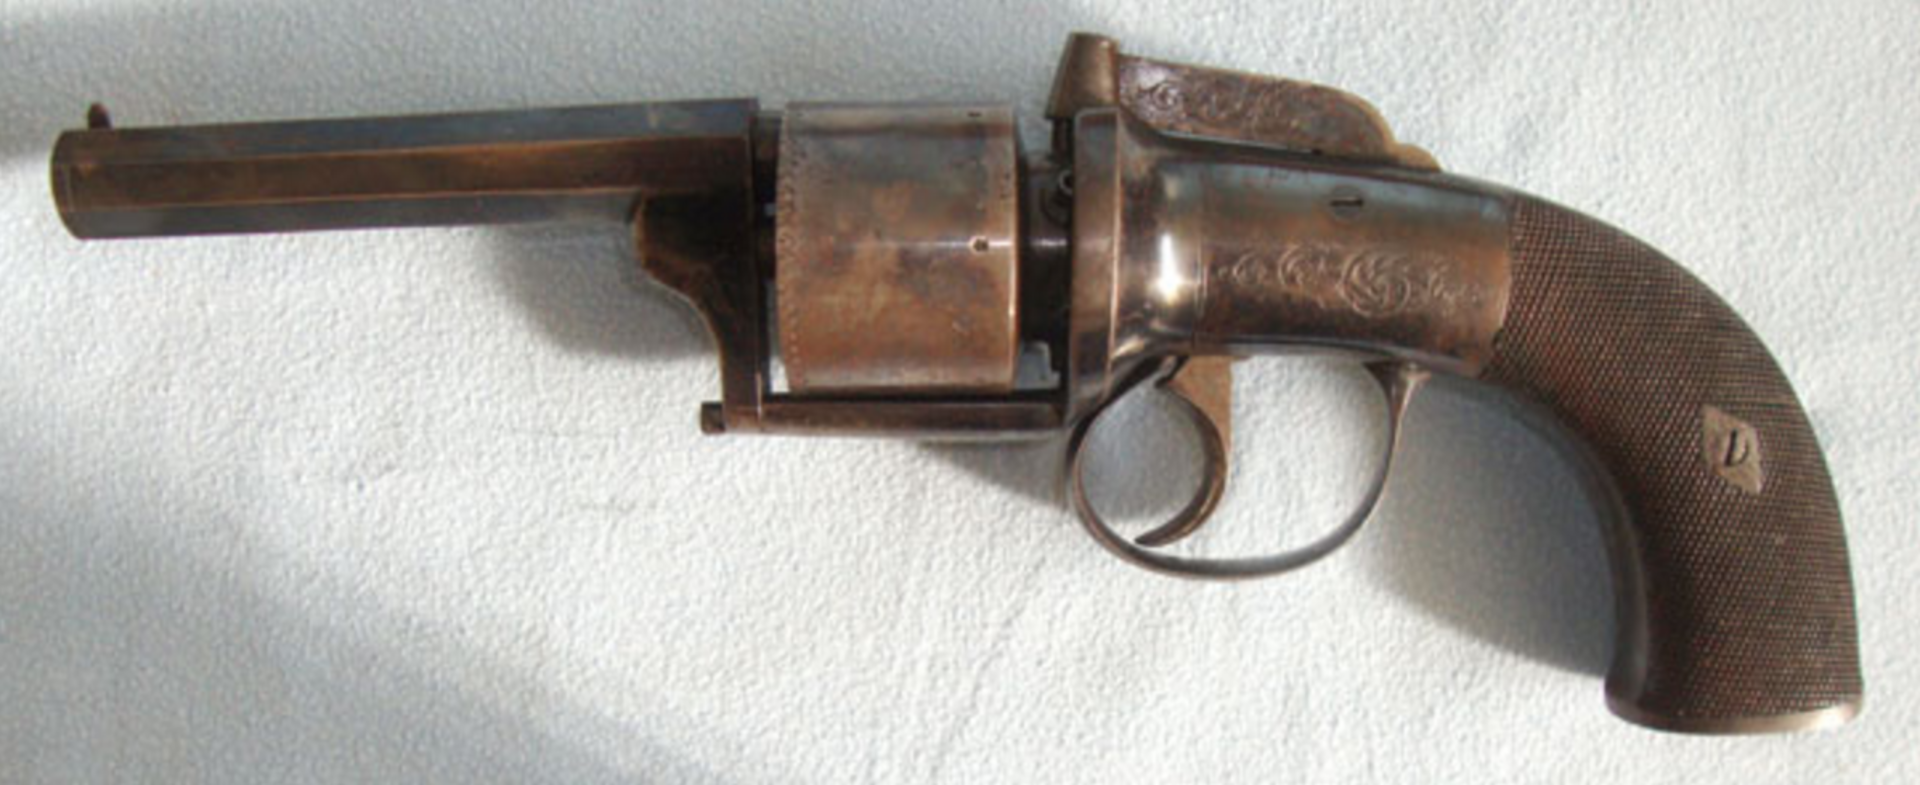 MINT, C1840, English Laird's Patent .44" Bore, Transitional 6 Shot Bar Hammer Percussion Revolver - Image 3 of 3